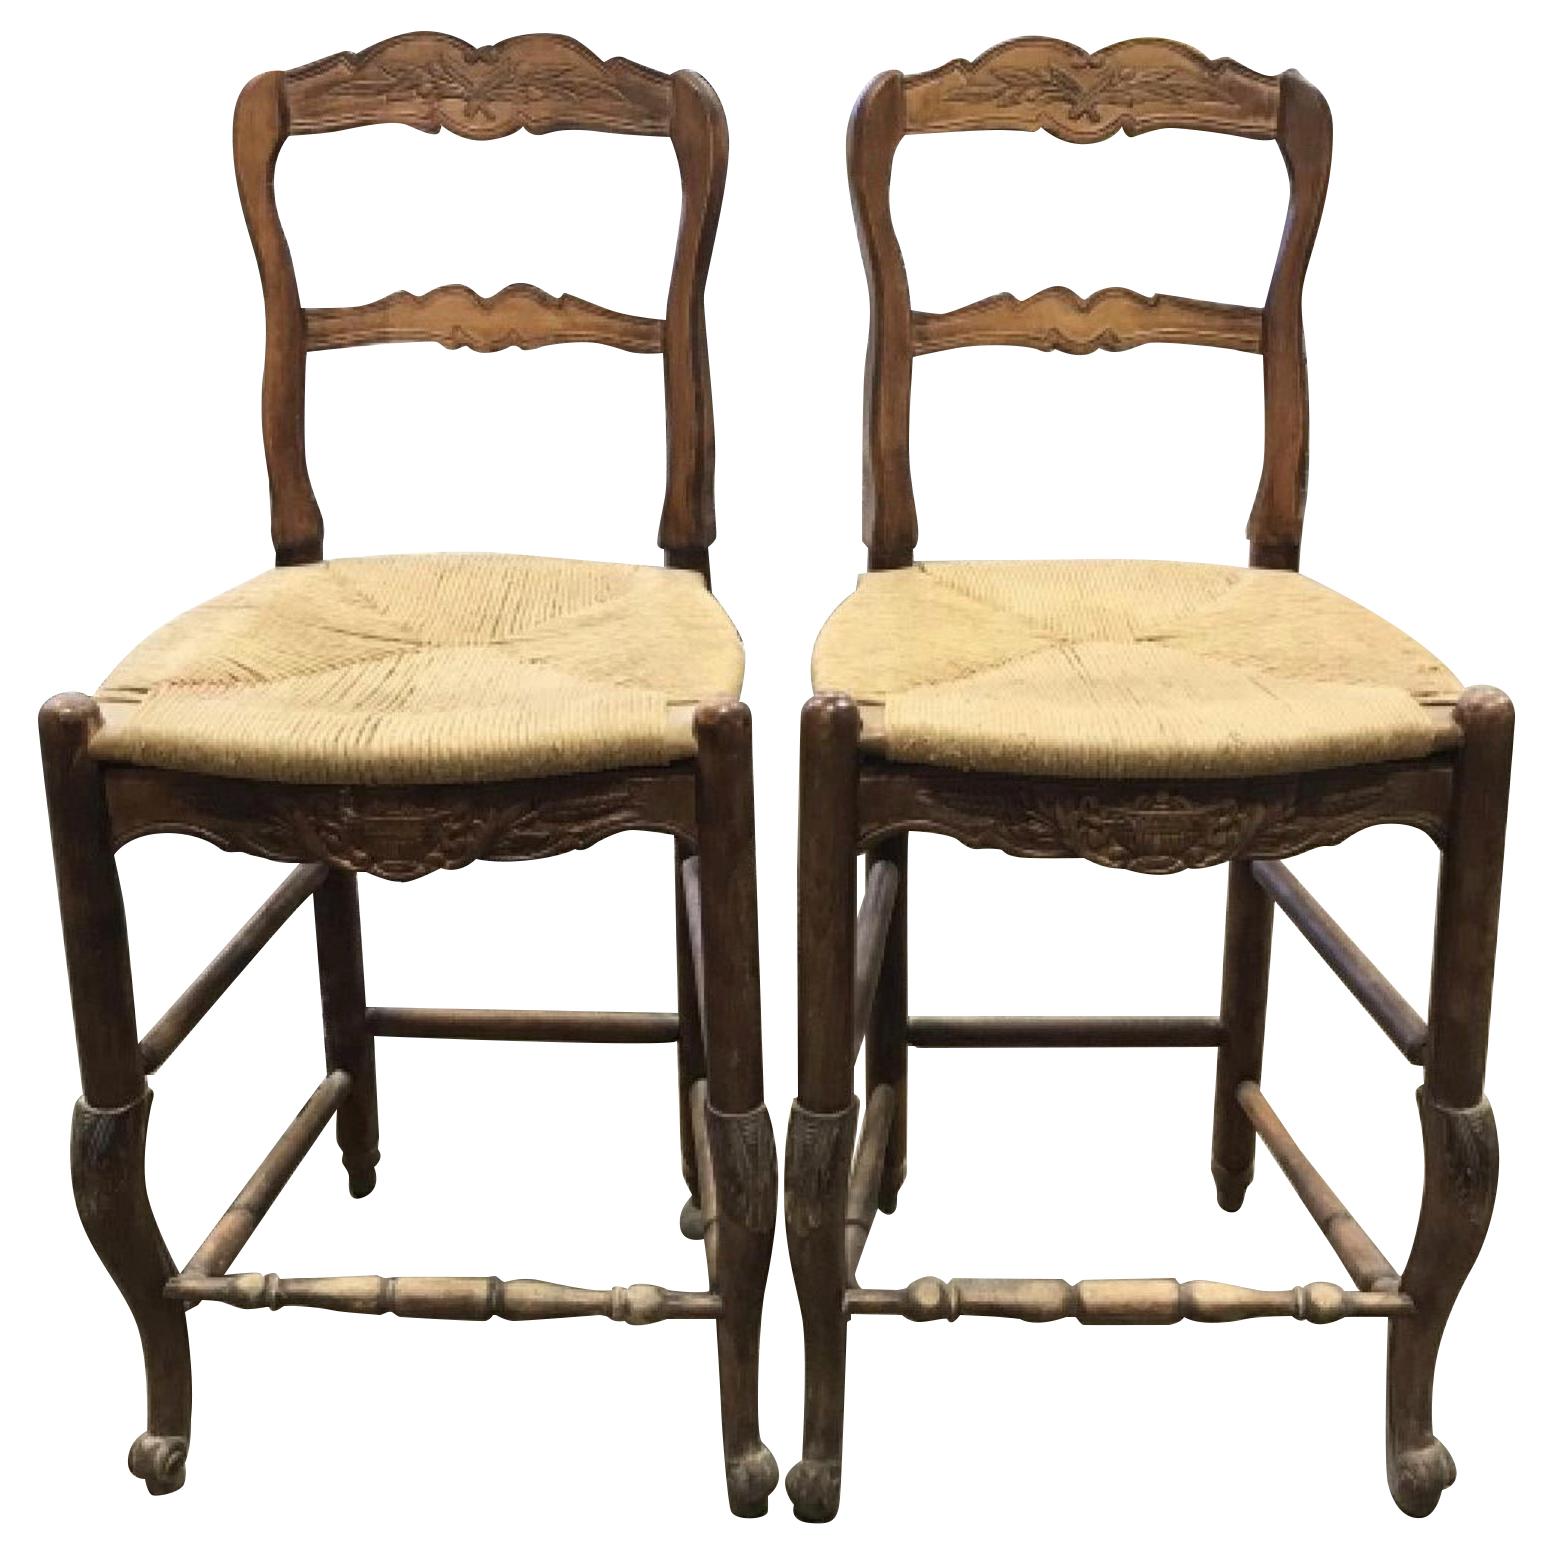 Pair of Provincial Carved Wooden Bar Stools with Rushed Seats